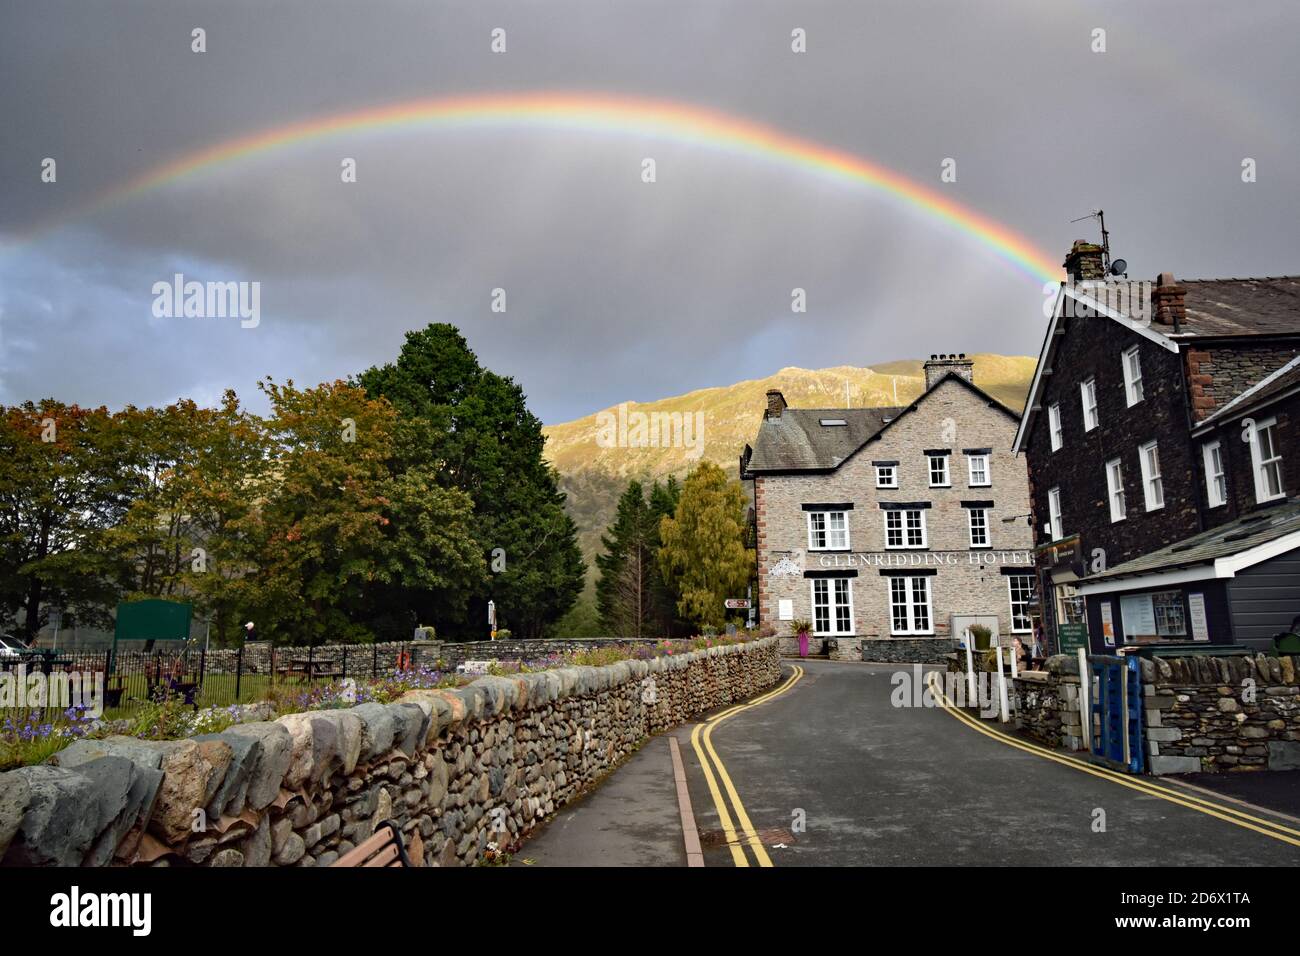 A rainbow above the Glenridding Hotel on the edge of Ullswater in the Lake District National Park.  A stone wall lines the road leading to the hotel. Stock Photo